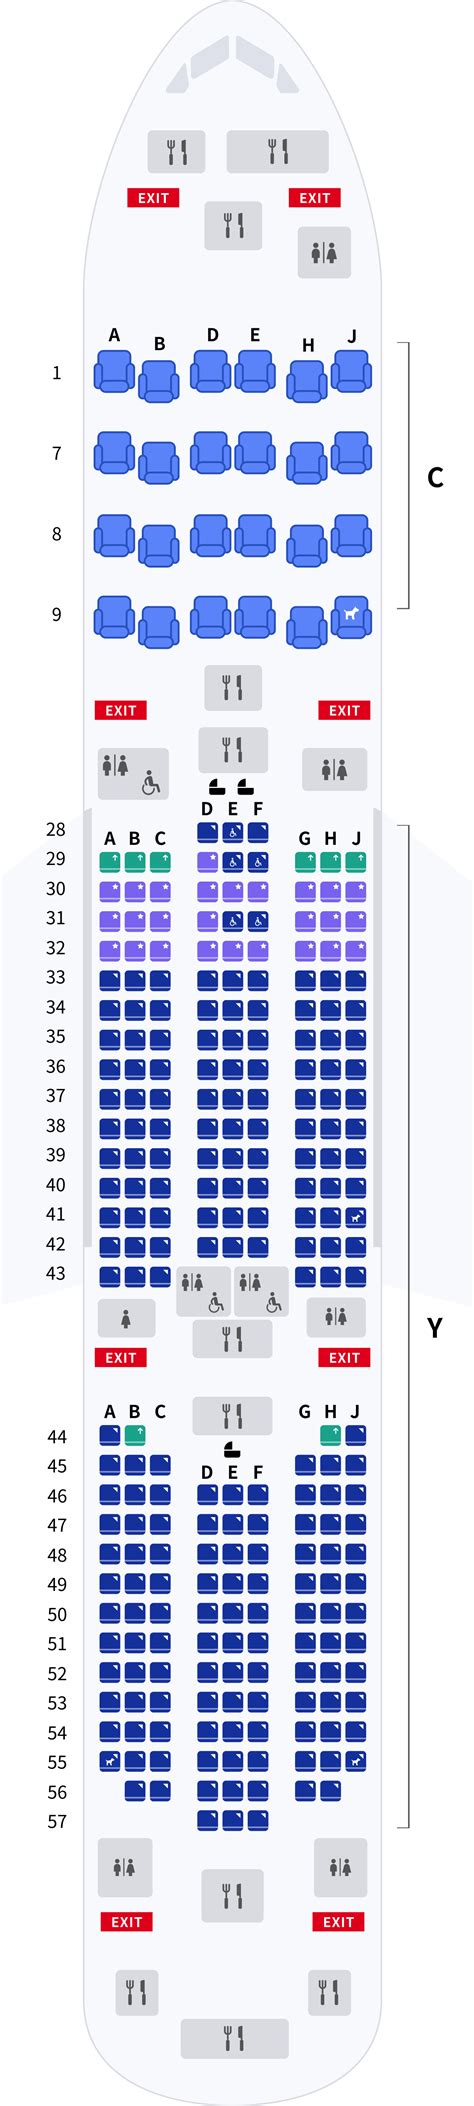 Boeing 787 9 Seating Chart Air France Elcho Table